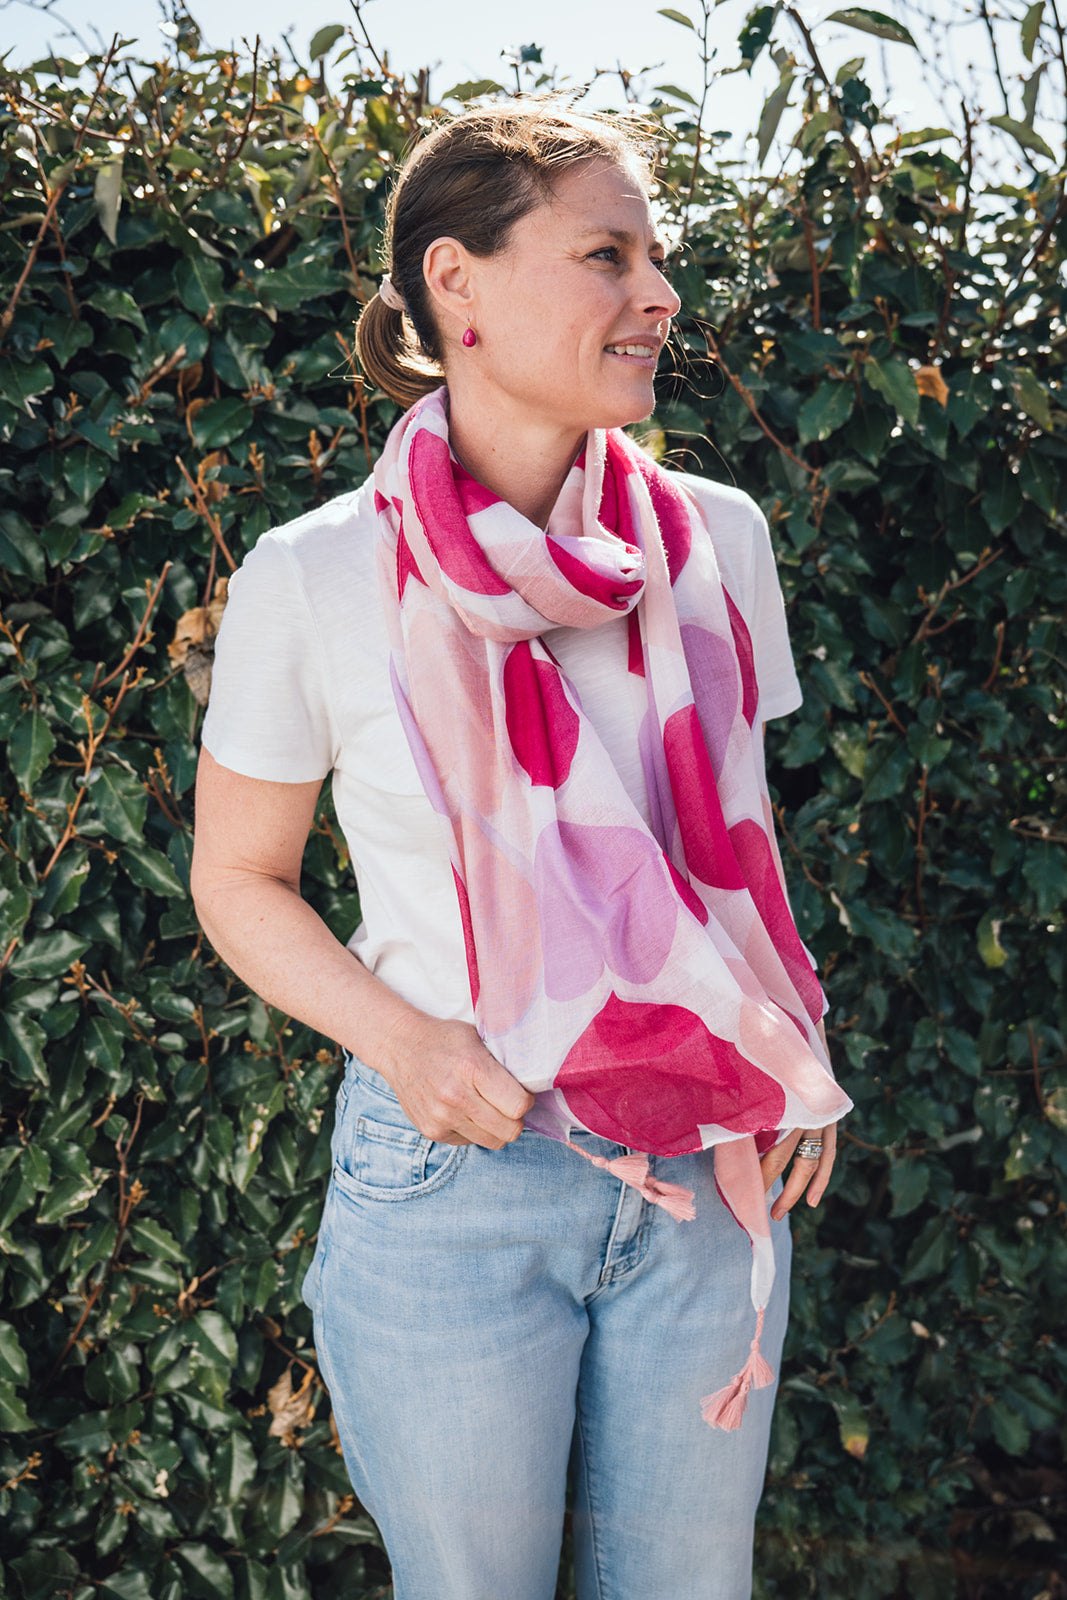 Fall in love with our Love Heart Scarf! It's lightweight, perfect for year-round wear, and features charming pink tassels on each corner for a little added texture. The white base adorned with pink and lilac hearts adds a touch of sweetness to any outfit. What's not to love!